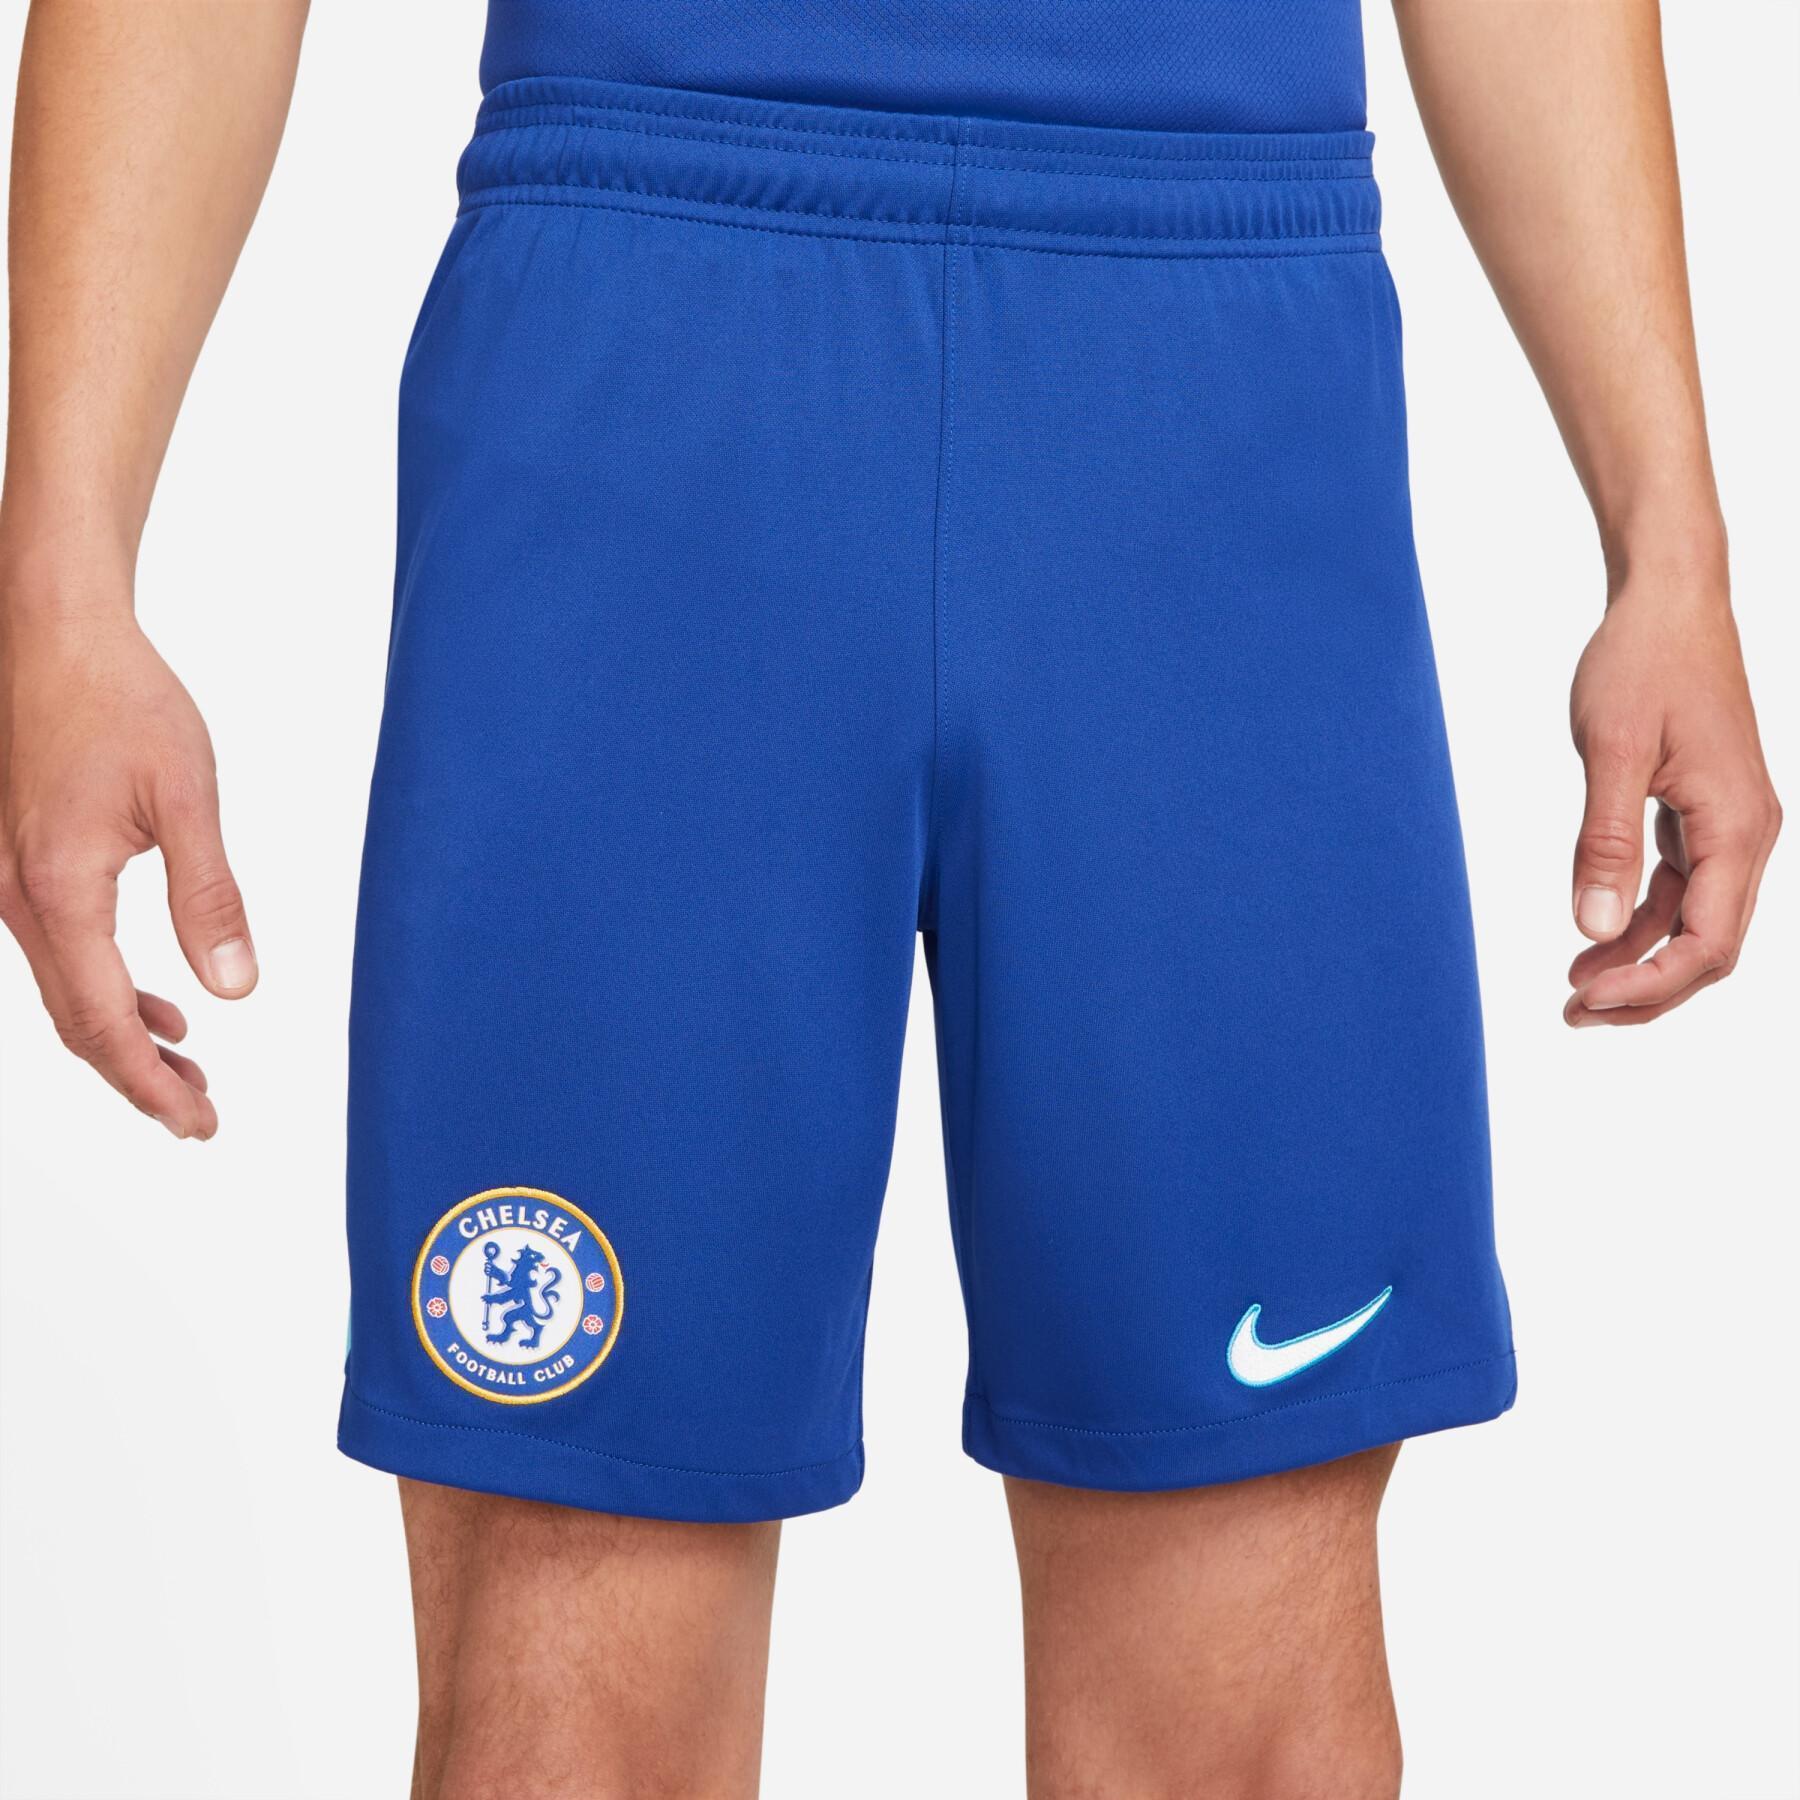 Home/office shorts Chelsea FC 2022/23